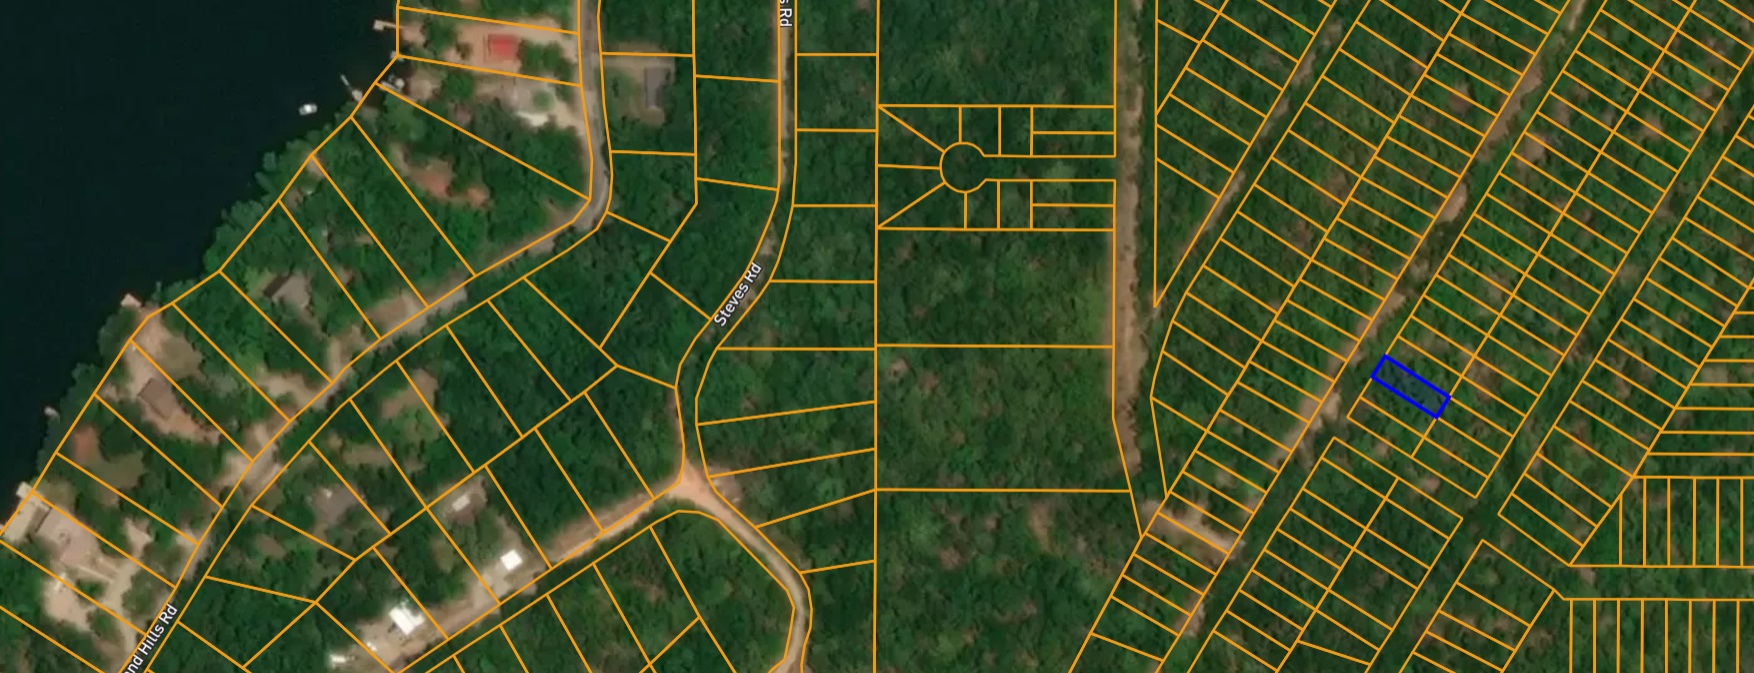 Lot 13, Old CCC Rd, Hardy AR 72542